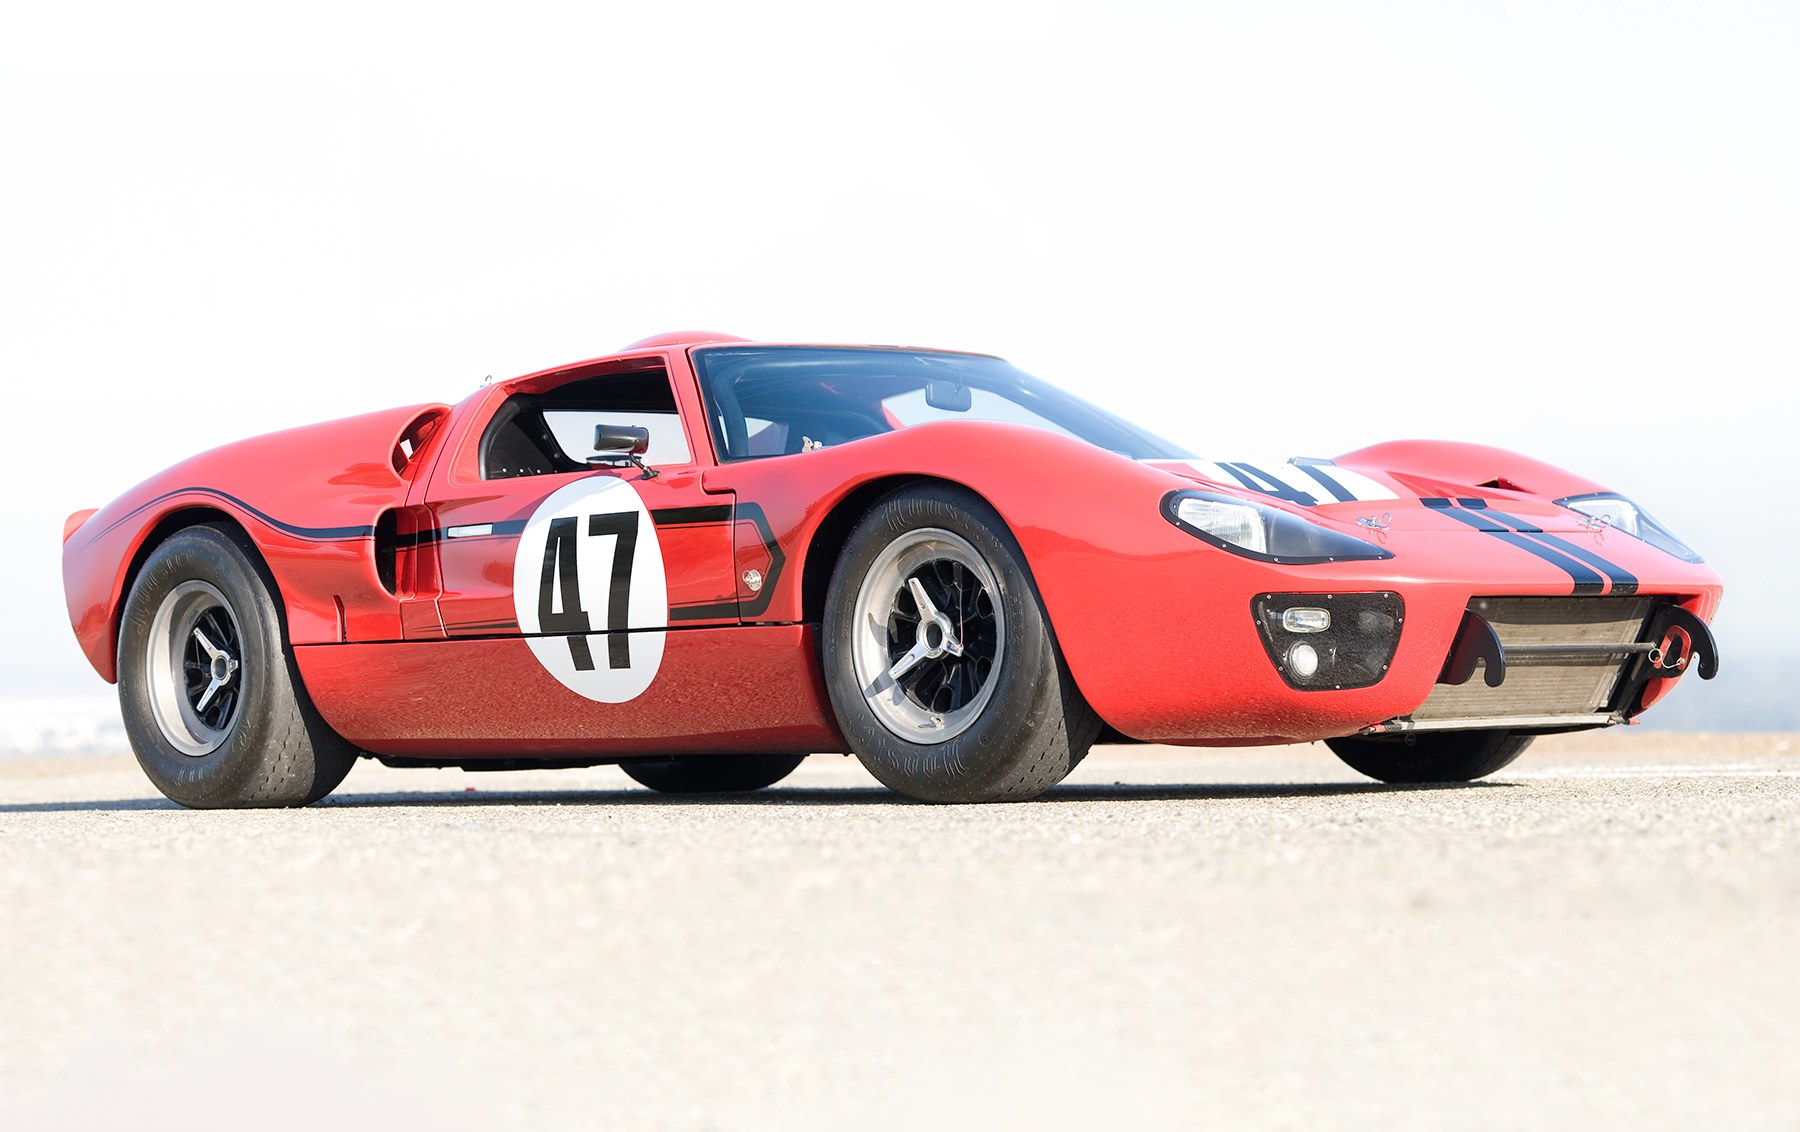 1967 Ford GT40 MKIIB Re-Creation